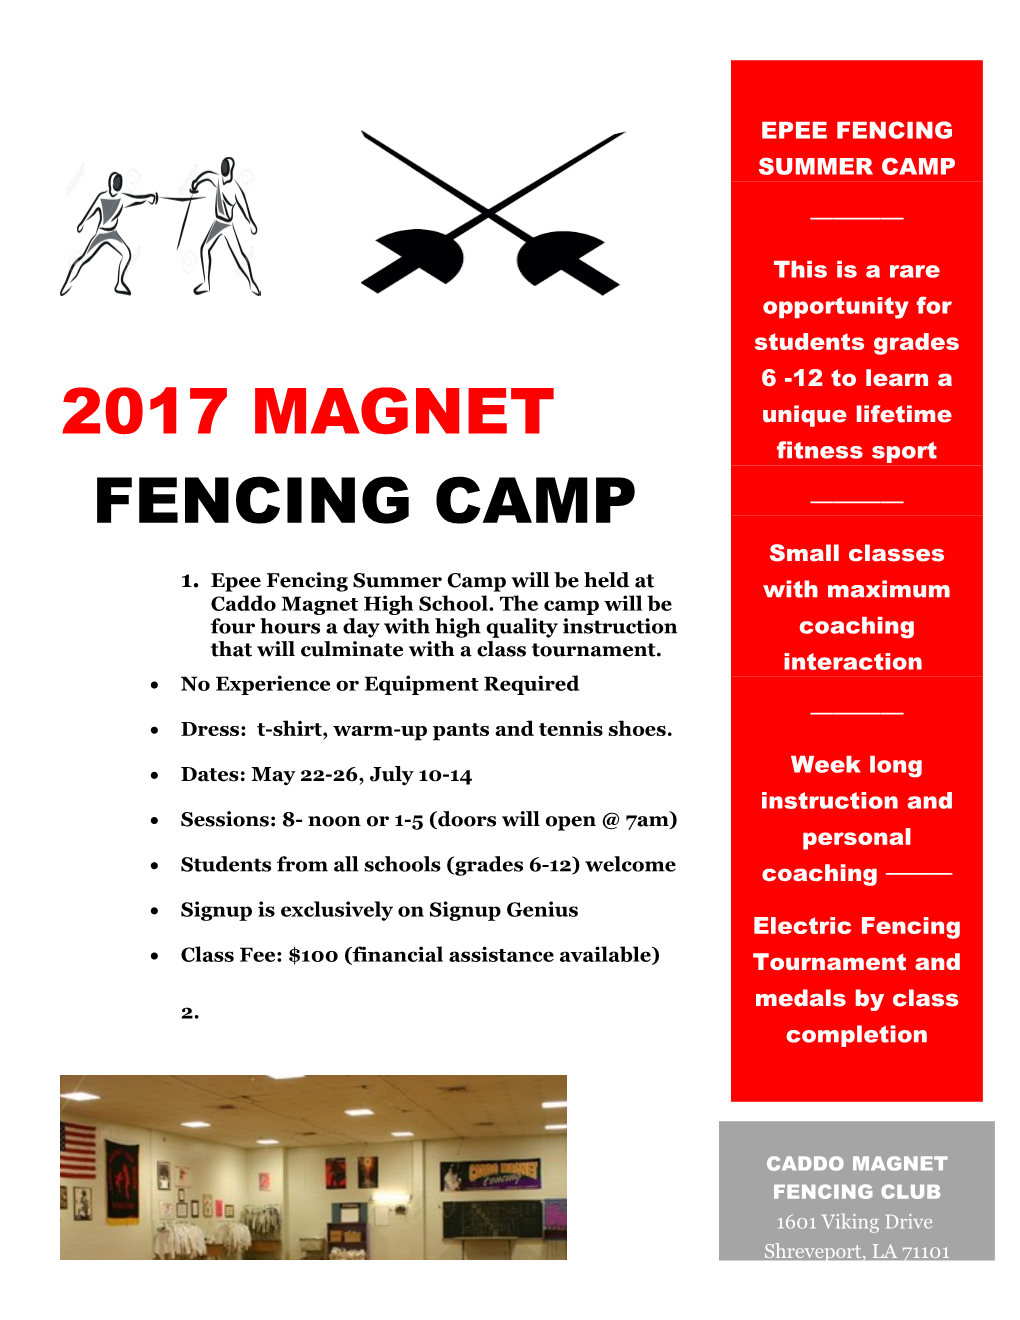 EPEE FENCING SUMMER CAMP This Is a Rare Opportunity for Students Grades 6 -12 to Learn